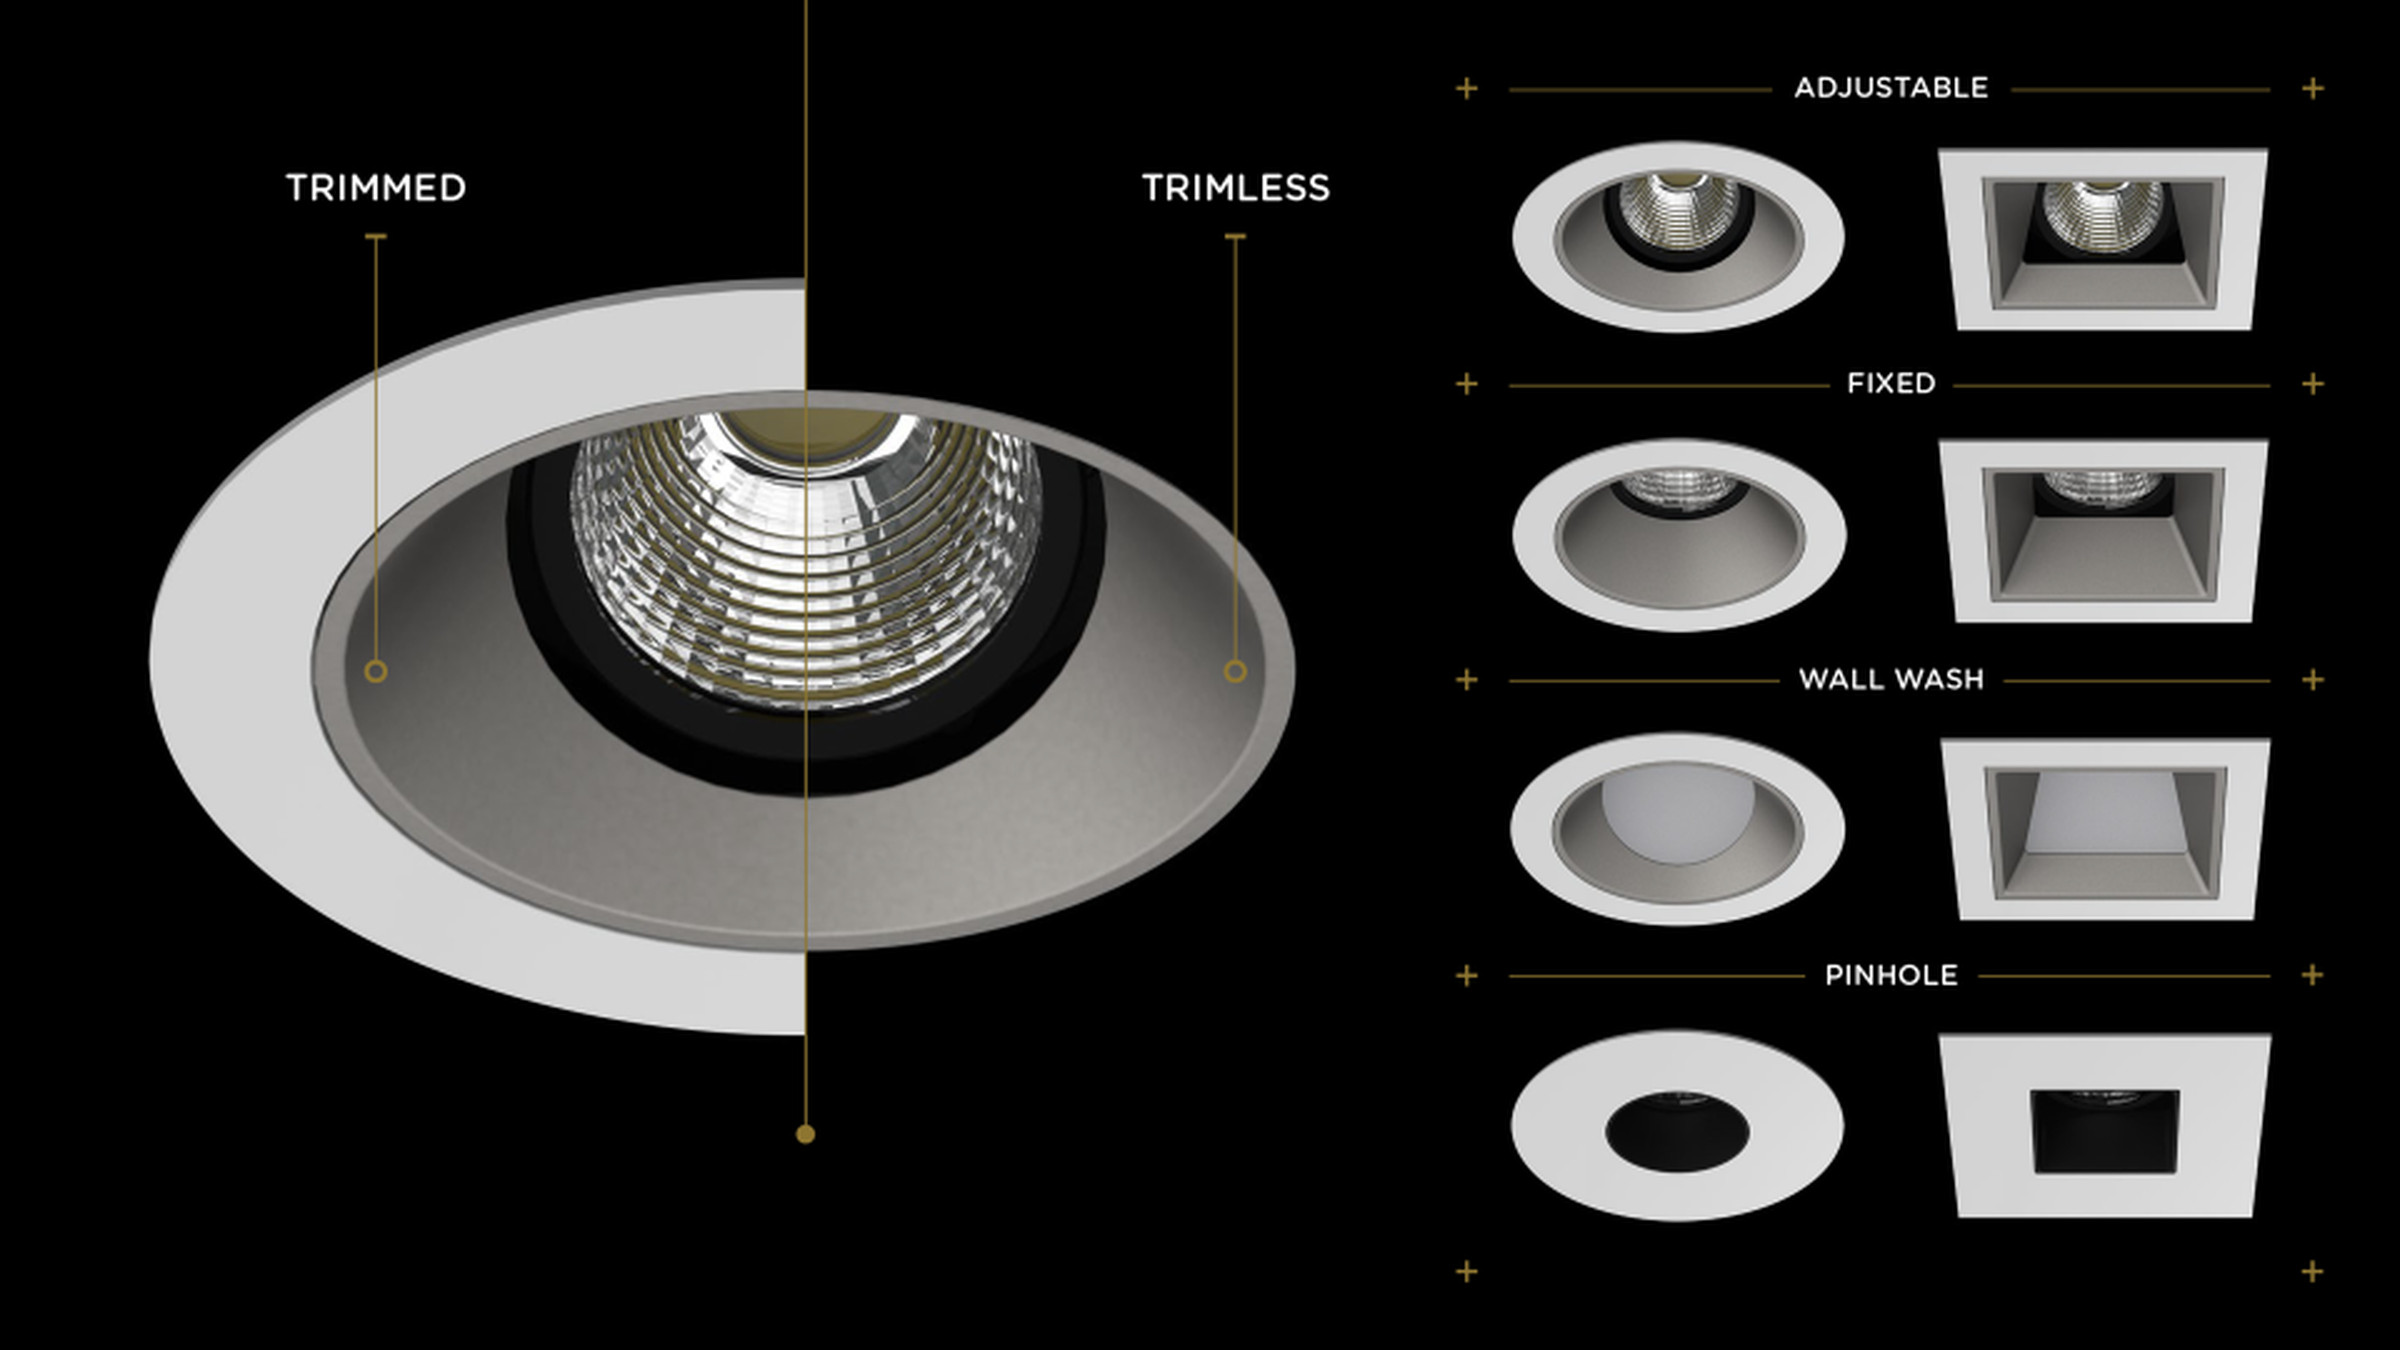 Crestron’s new LED lights come in adjustable, wall wash, fixed frame, and pinhole fixtures, with square or round trims. 